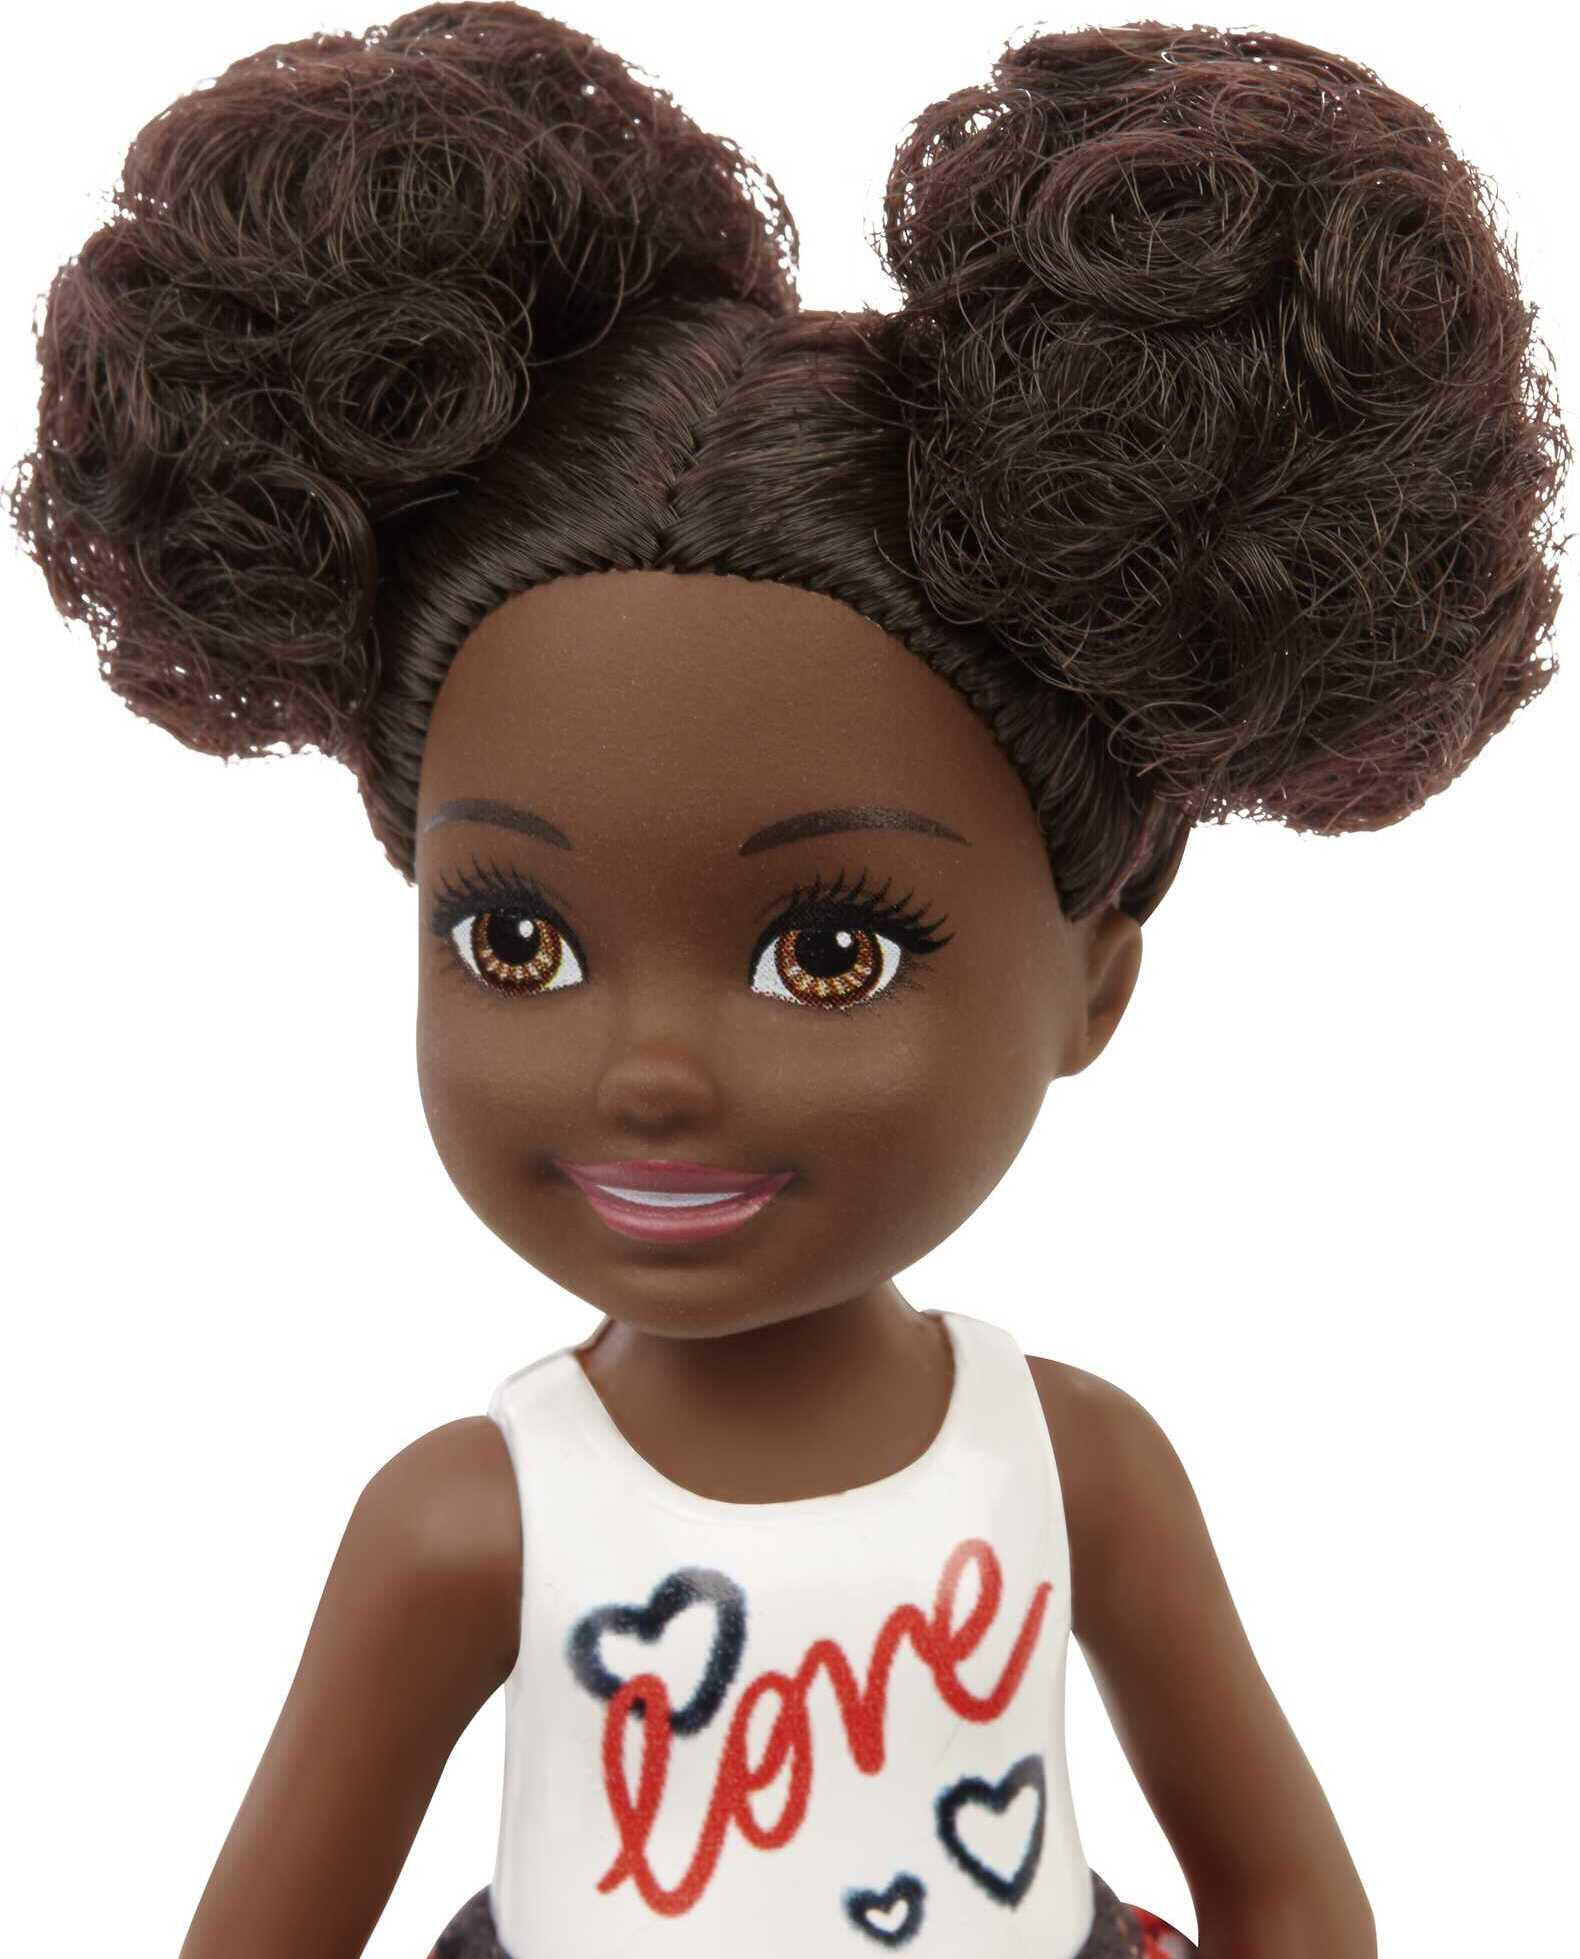 Barbie Chelsea Small Doll with Black Hair in Afro Puffs Wearing Removable Skirt & Silvery Shoes - image 2 of 6